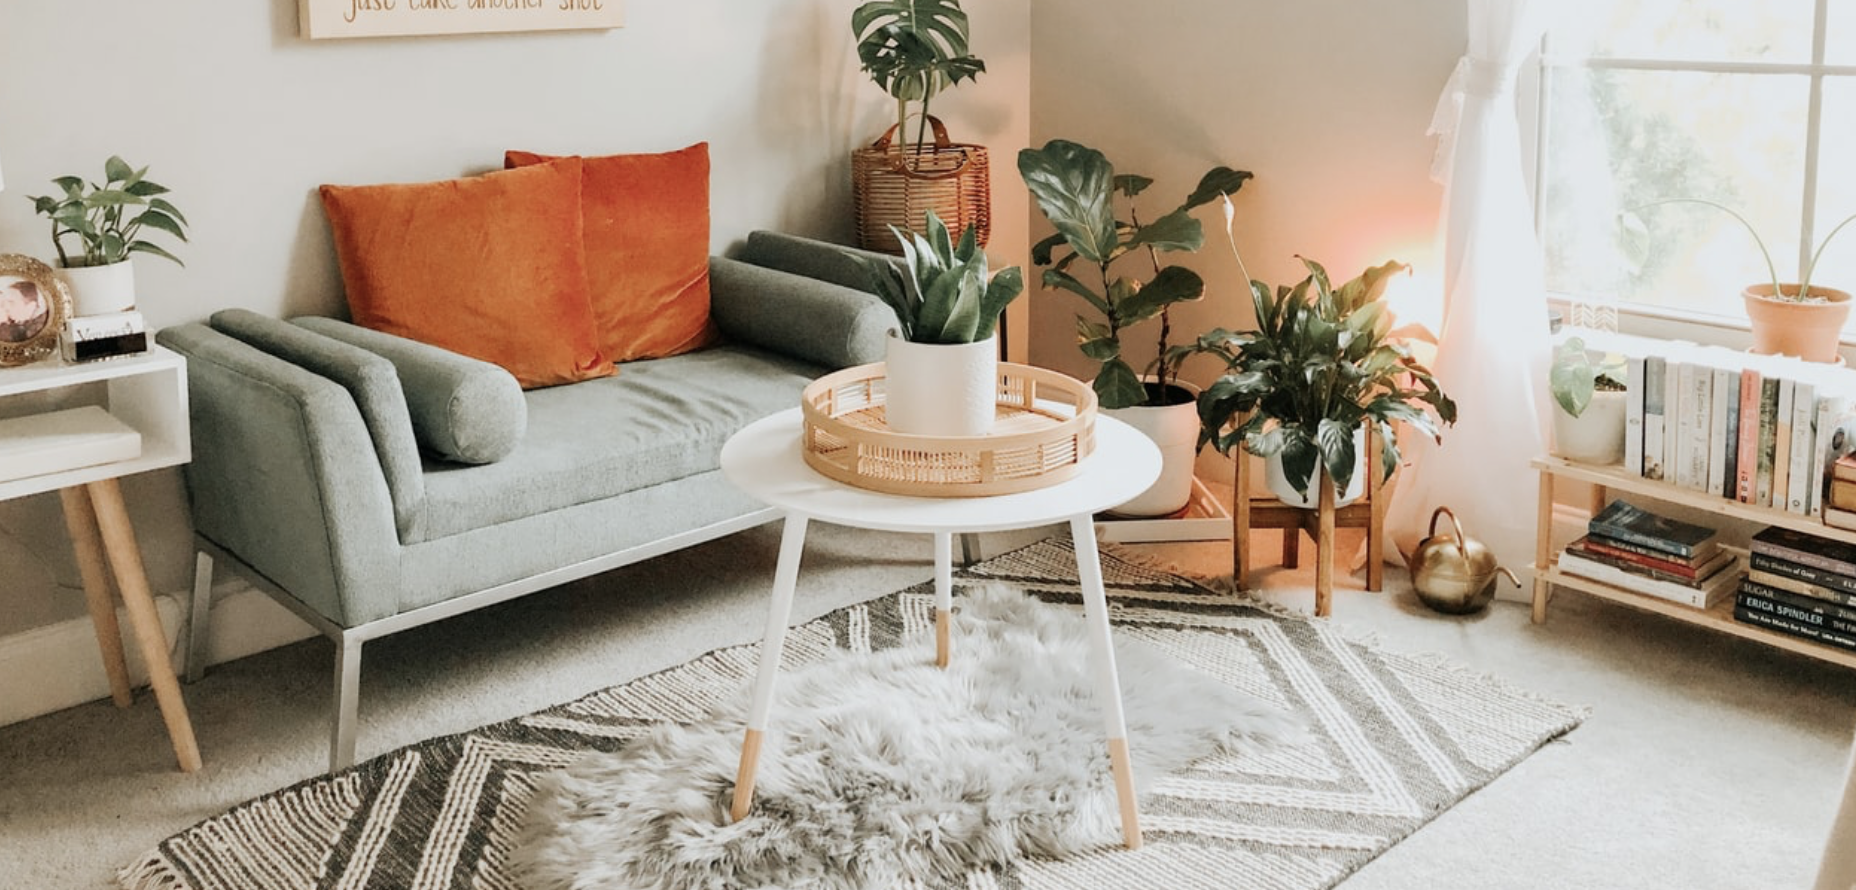 Decorating your Apartments for Rent in Studio City: Living Room Edition